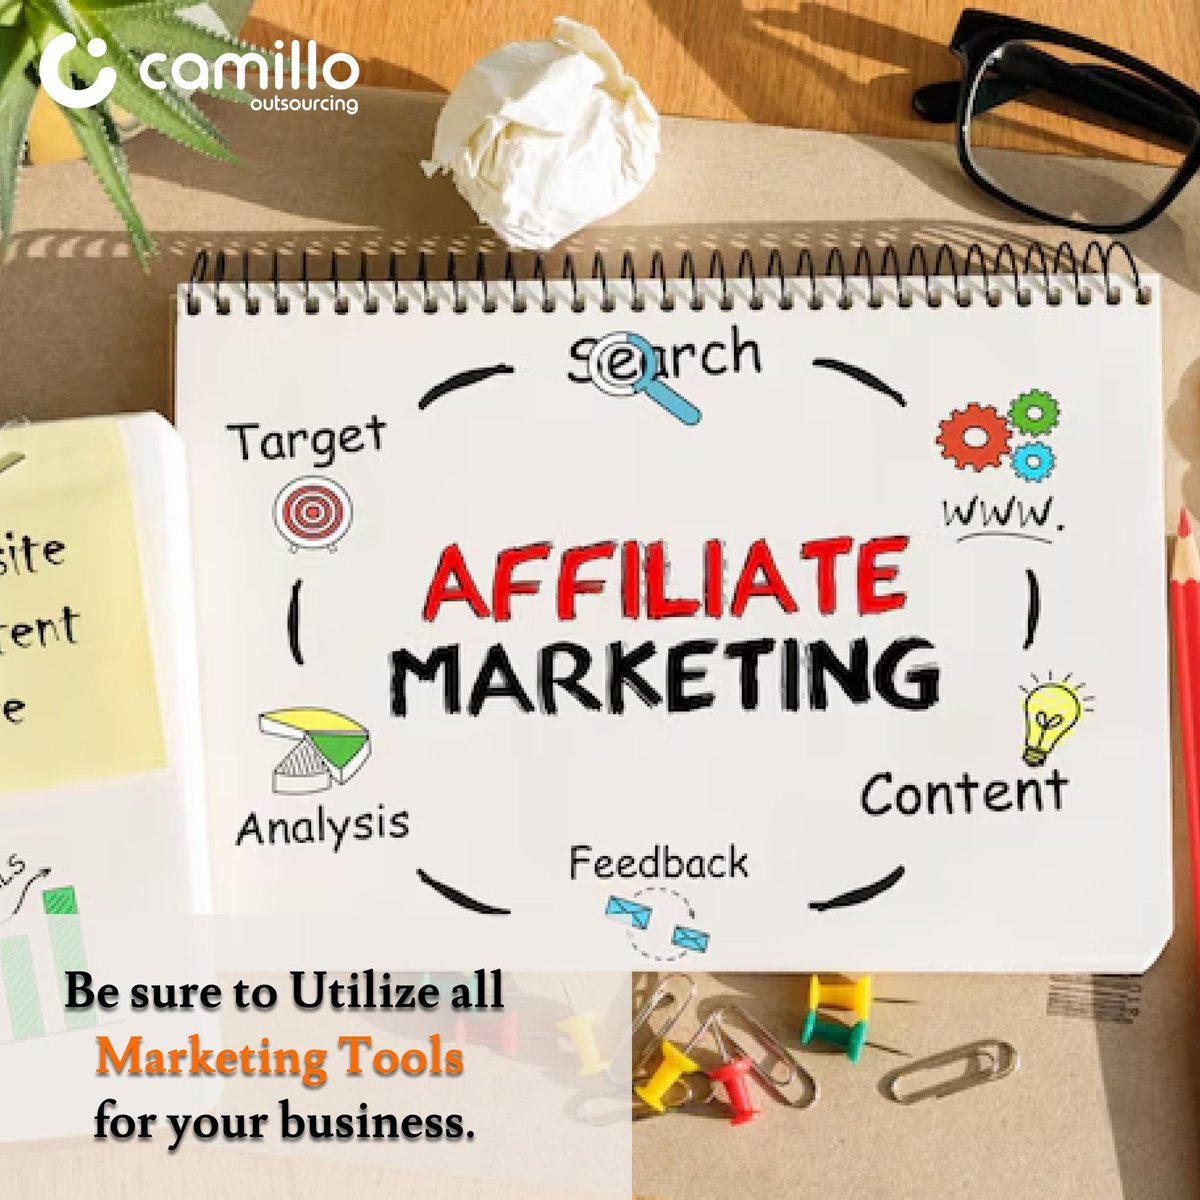 Utilize all available Marketing tools for your business.

Then you can select which works best for you.

Be ready to explore and get the leads you desire.

#camillo #outsourcing #marketingactivities
#marketingtool #marketingstrategy